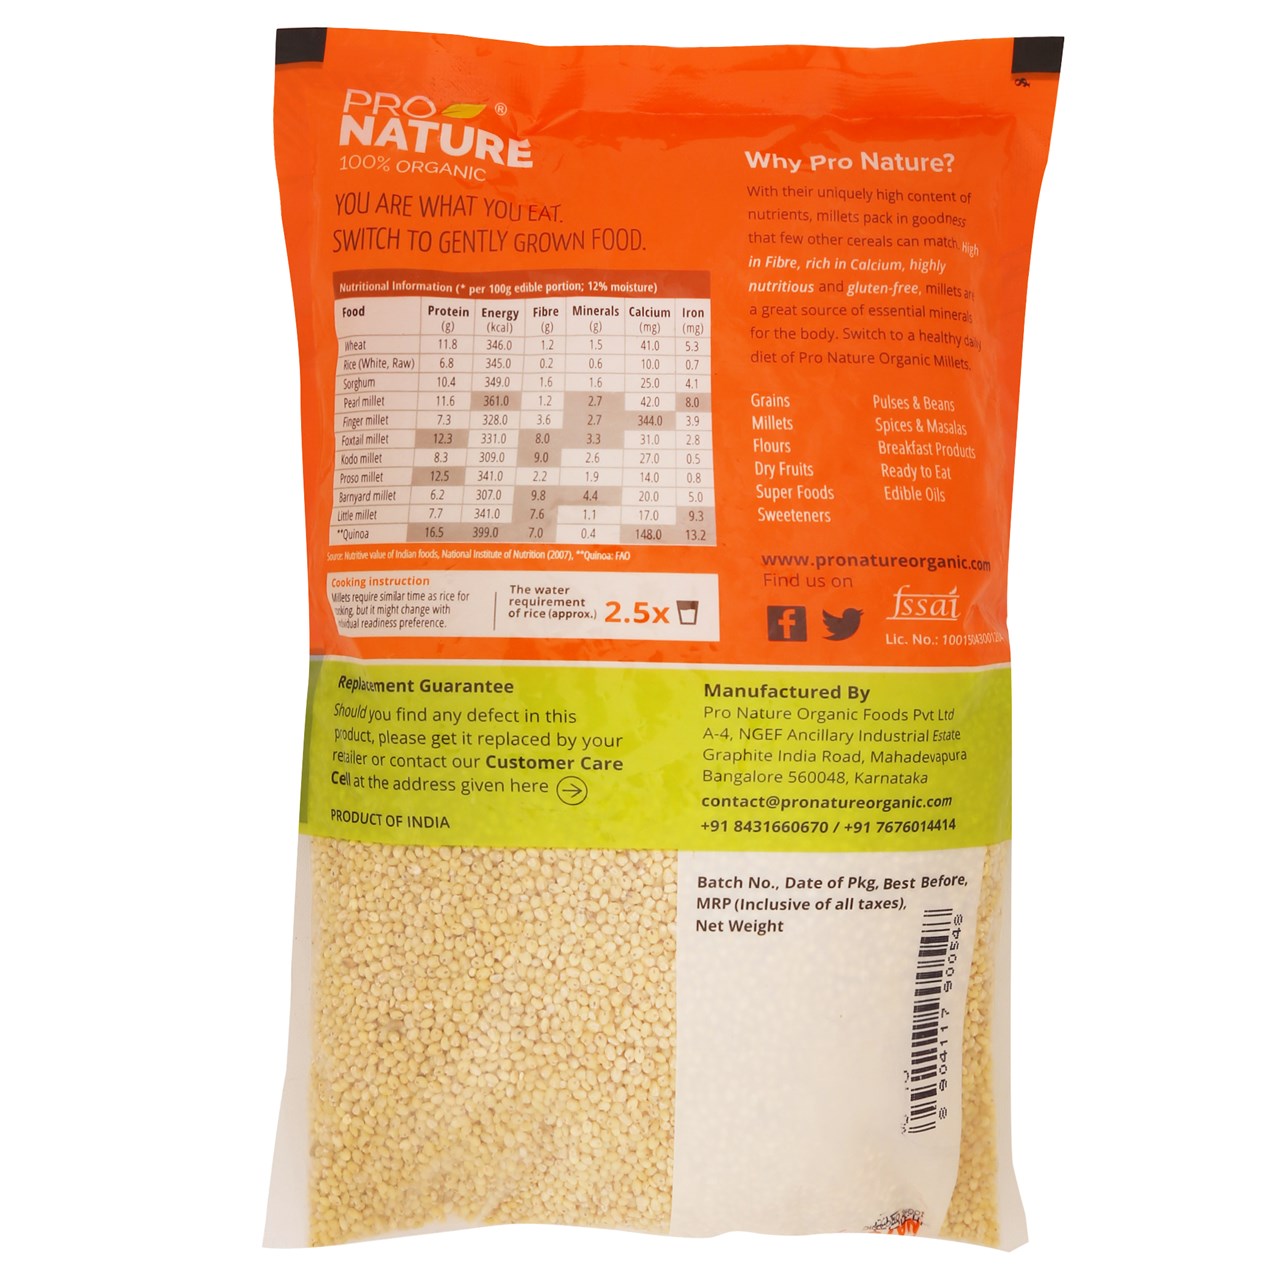 Picture of Pro Nature 100% Organic Proso Millet 500g